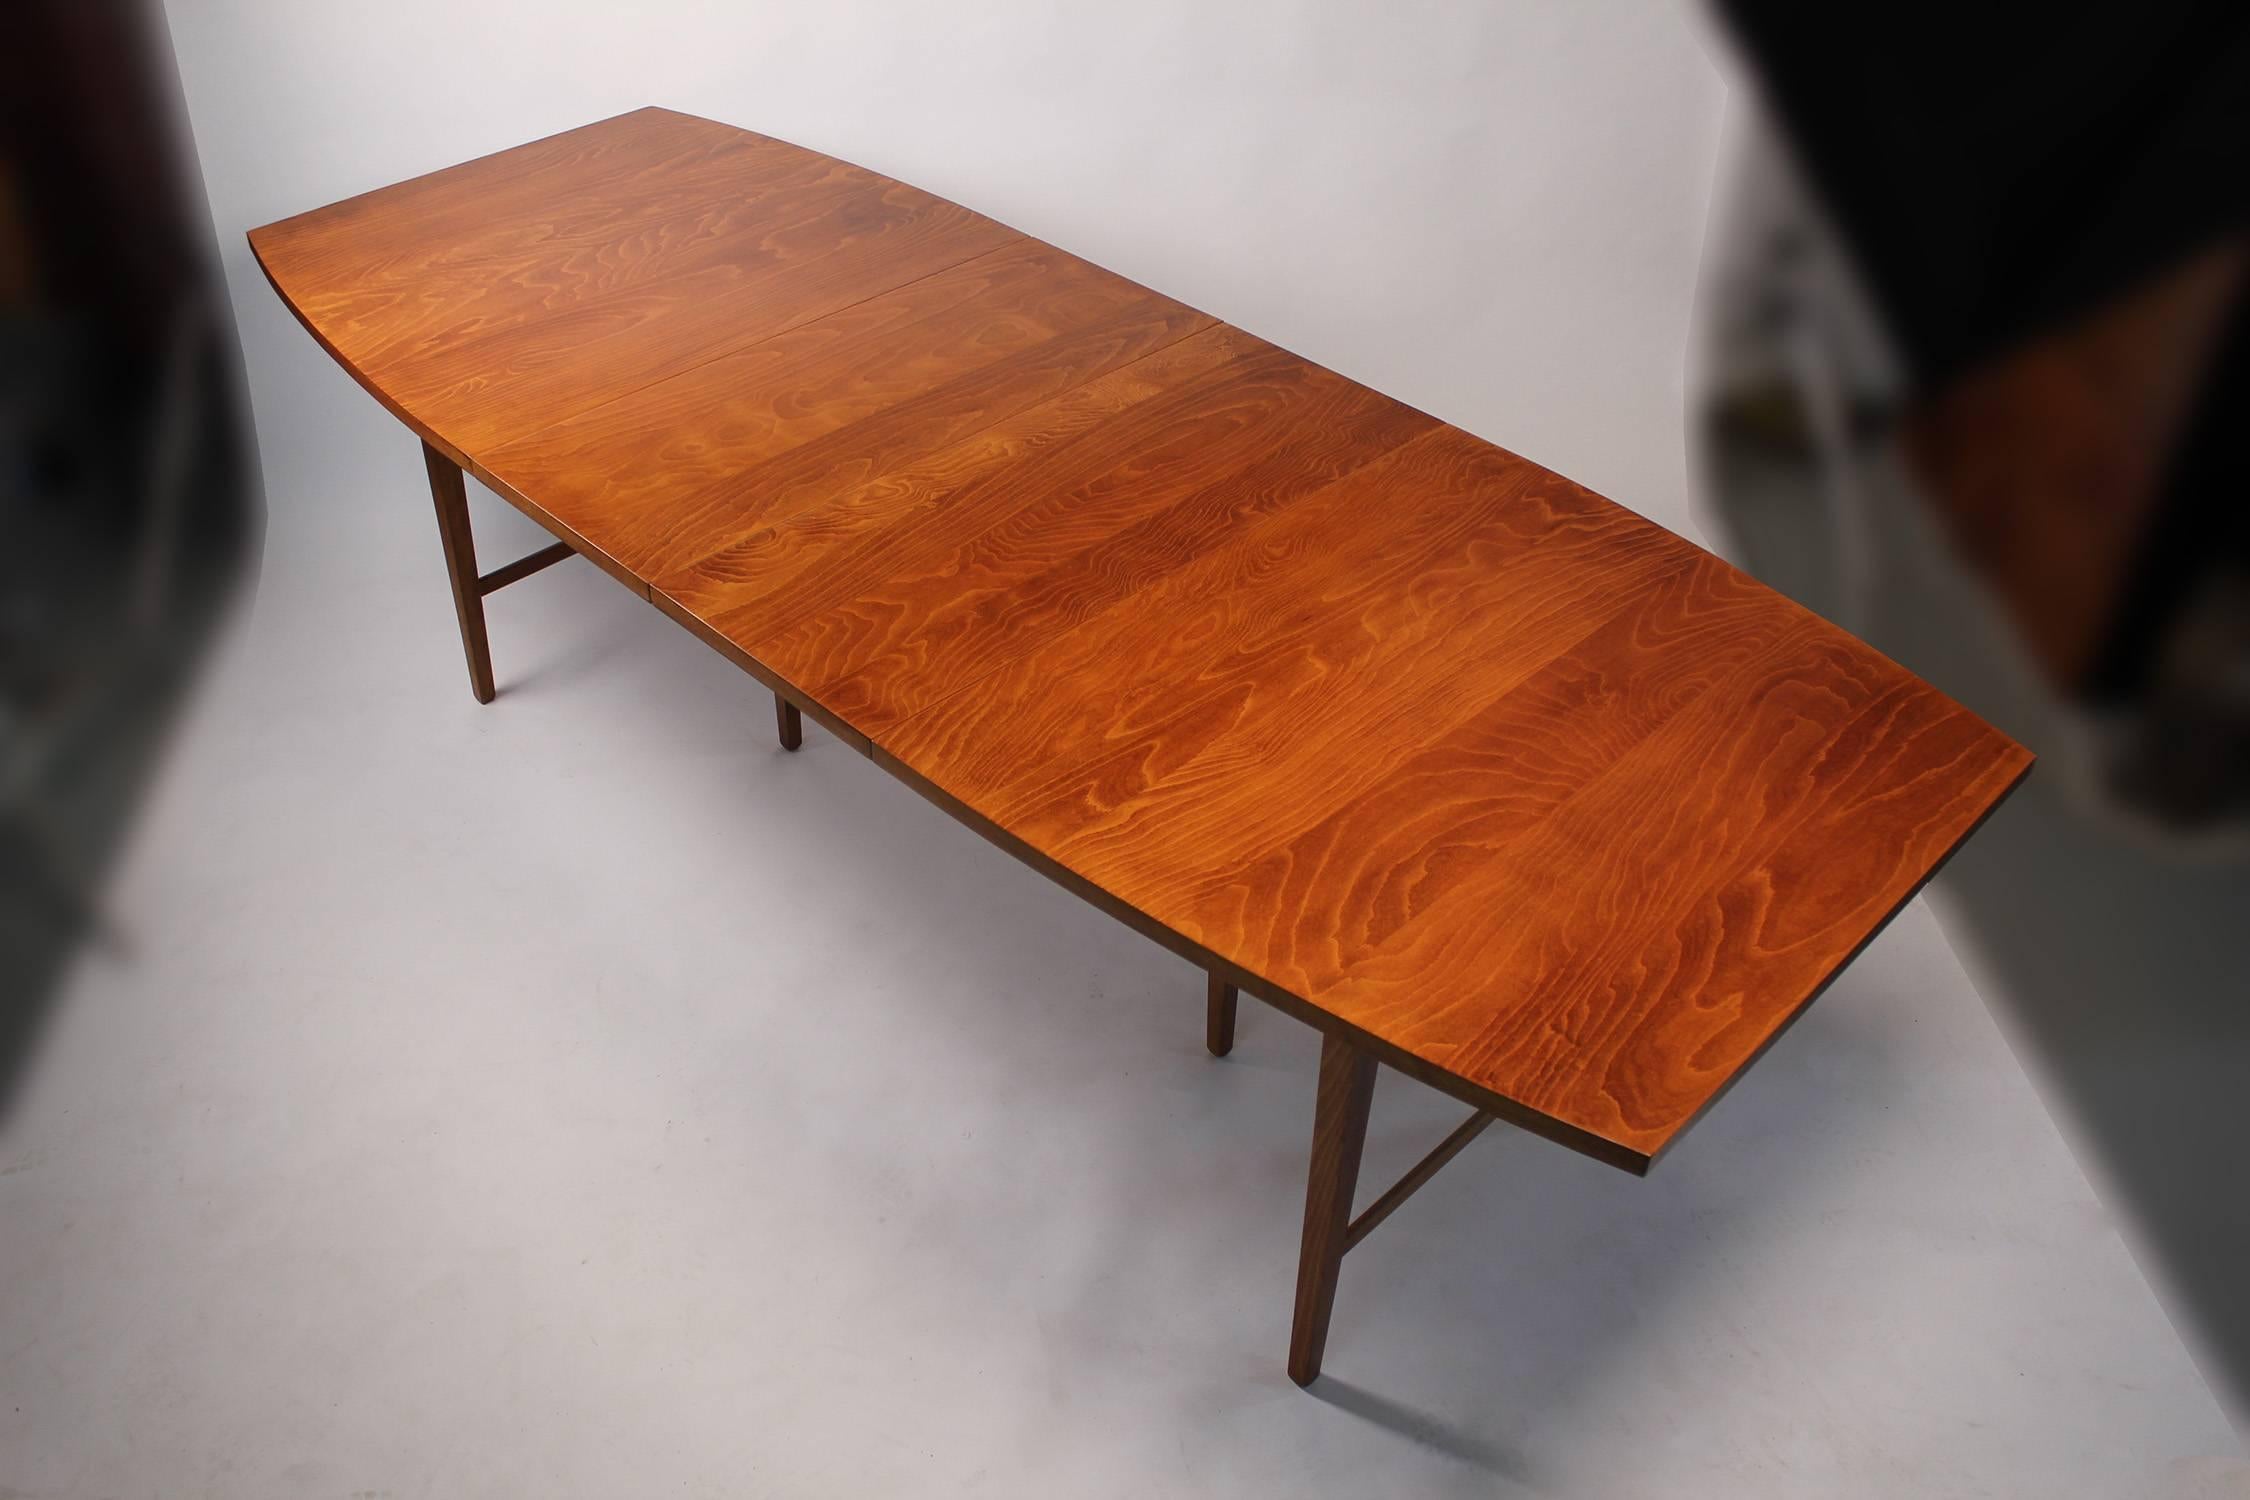 1960s Paul McCobb designed perimeter group dining table with two leaves. The maple top is absolutely incredible on this piece. The striations in the wood grain are very exotic. When both leaves are in place the table measures 96